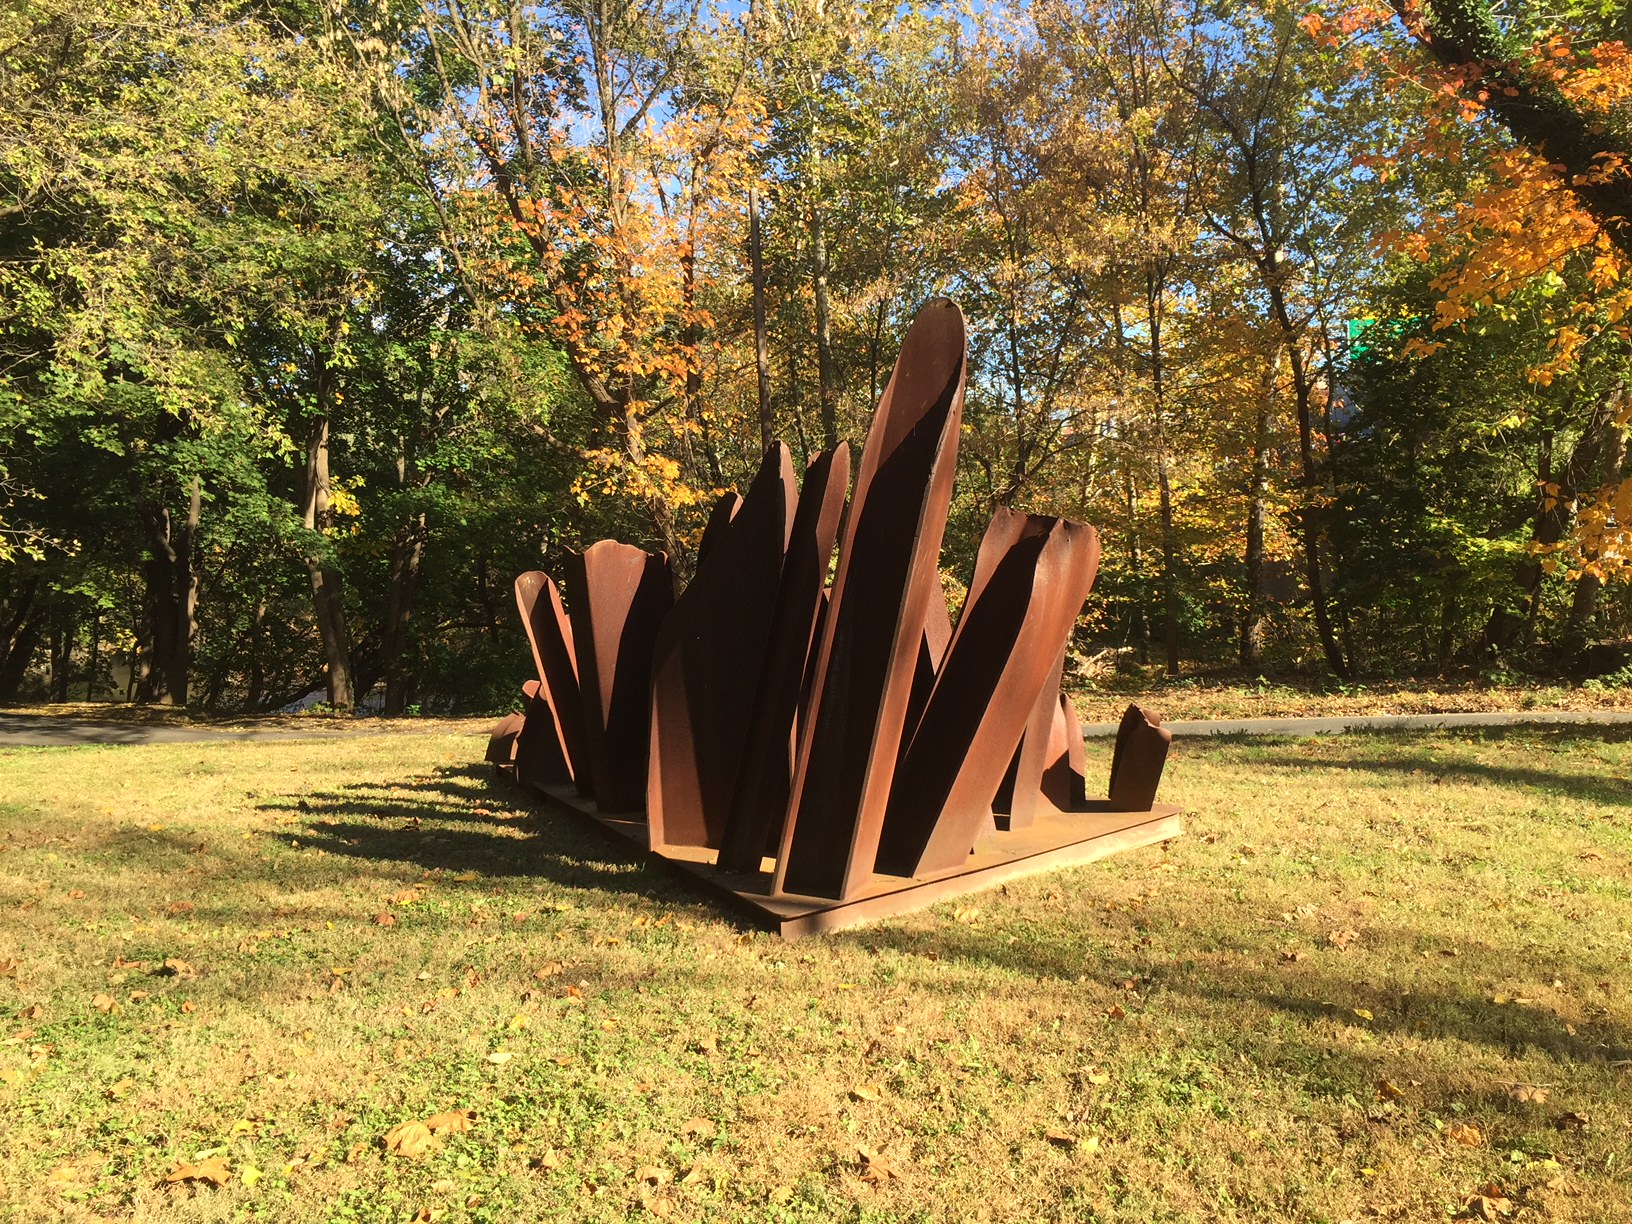 The metal sculpture Sprouts by Steve Tobin on the Karl Stirner Arts Trail